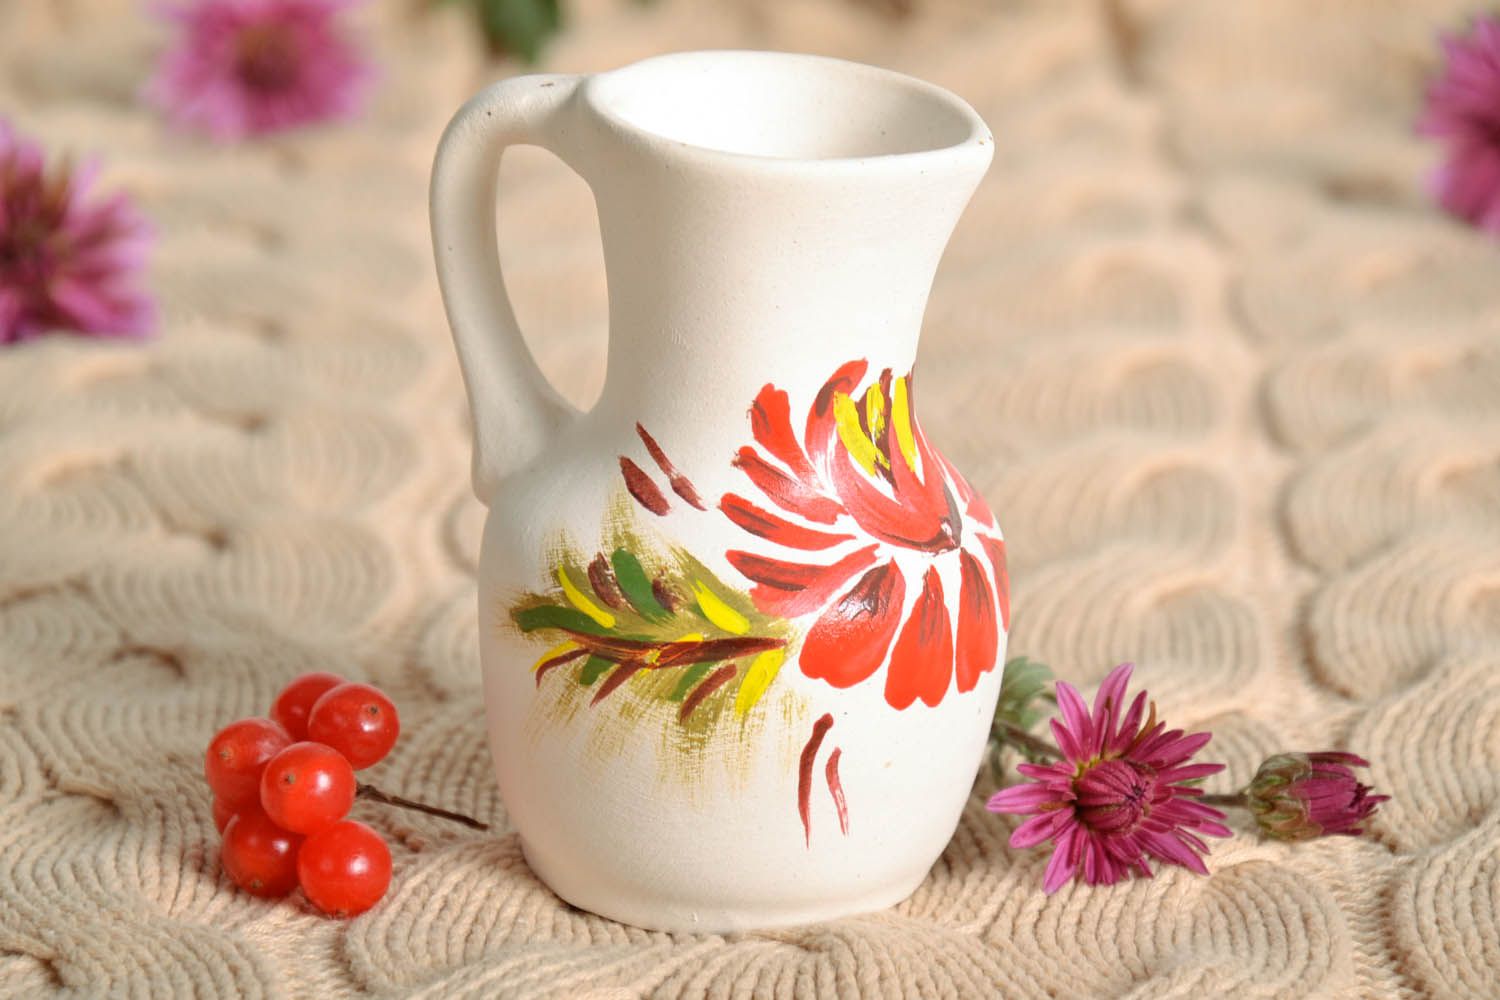 5 oz ceramic white pitcher with handle and floral design 0,26 lb photo 1